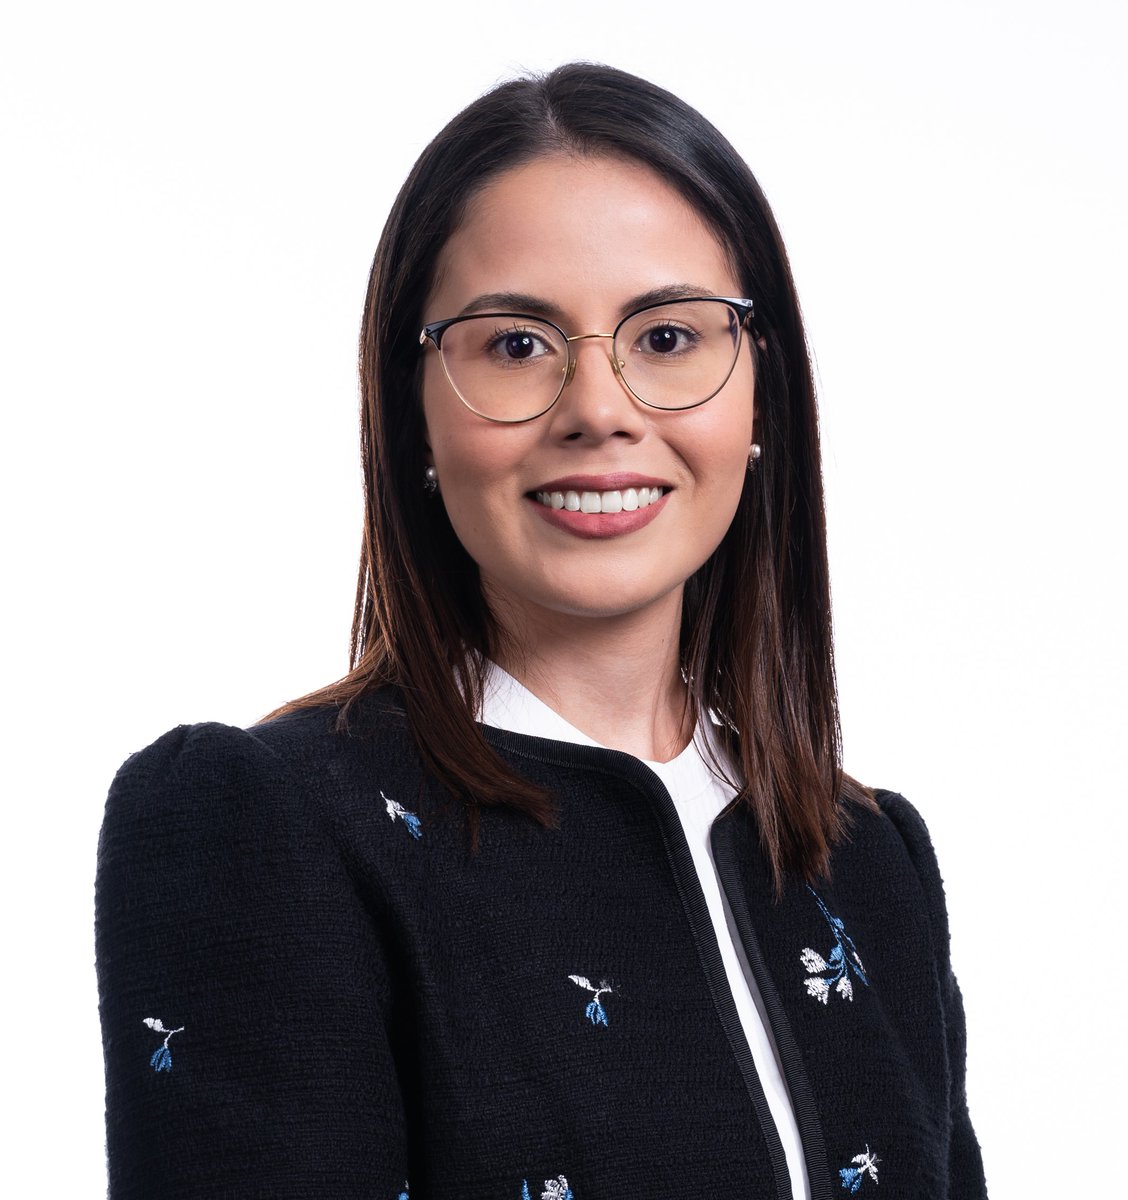 Wanting to gain “technical skills' and grow her 'leadership and soft skills' led Katherine Villalobos to chose LBS for her Master’s in Finance. The Costa Rican talks to @businessbecause about why she chose to study abroad. ow.ly/rCqU50RkYOR